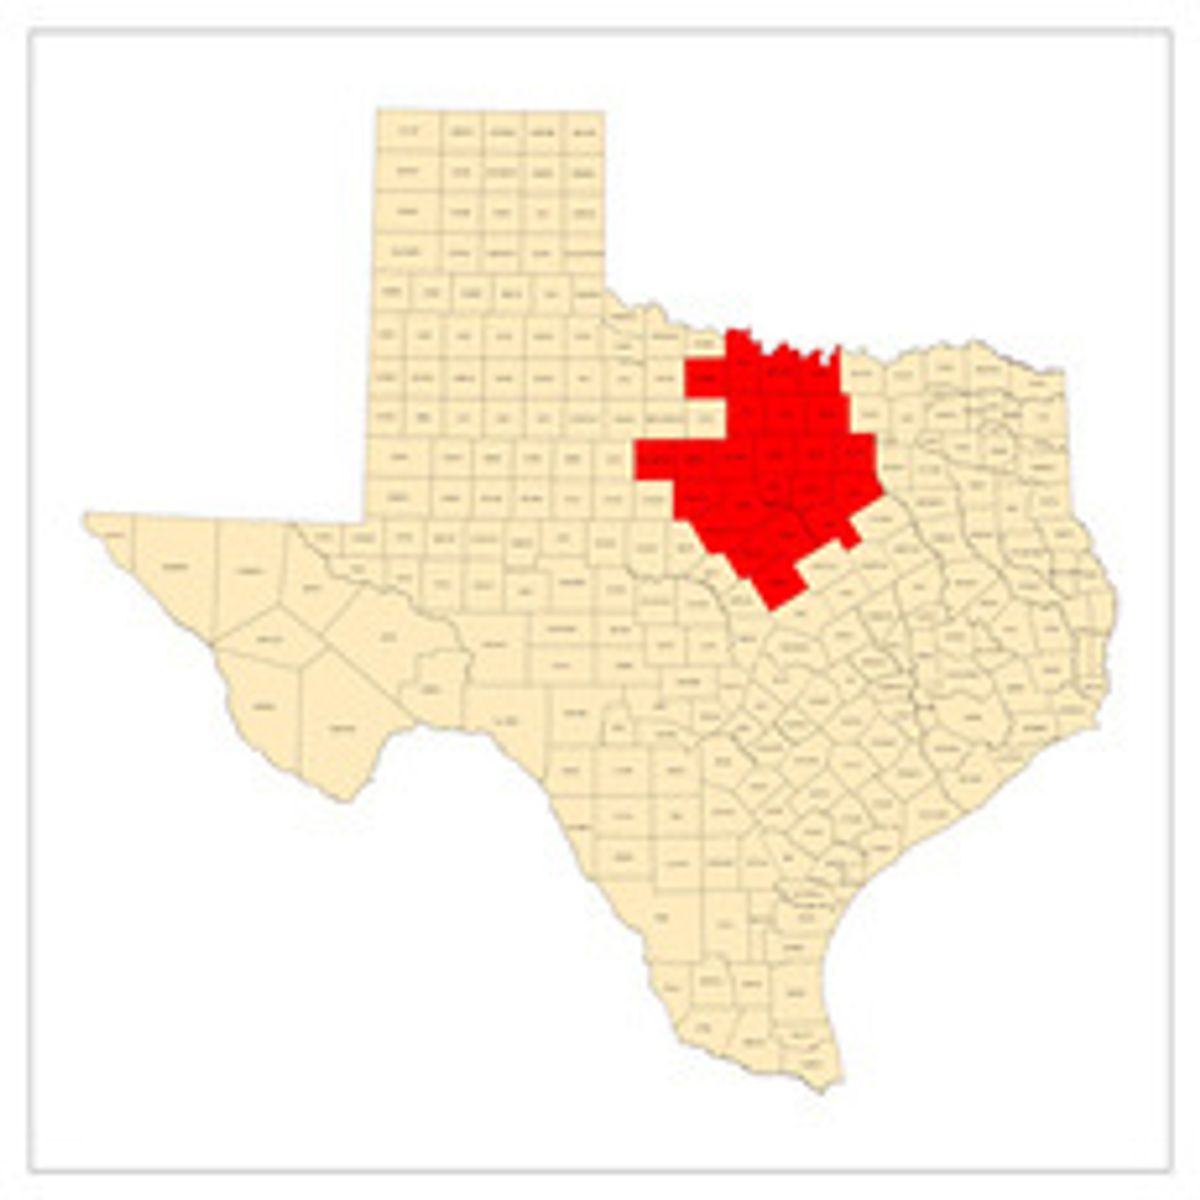 A Texas Natural Gas Anomaly